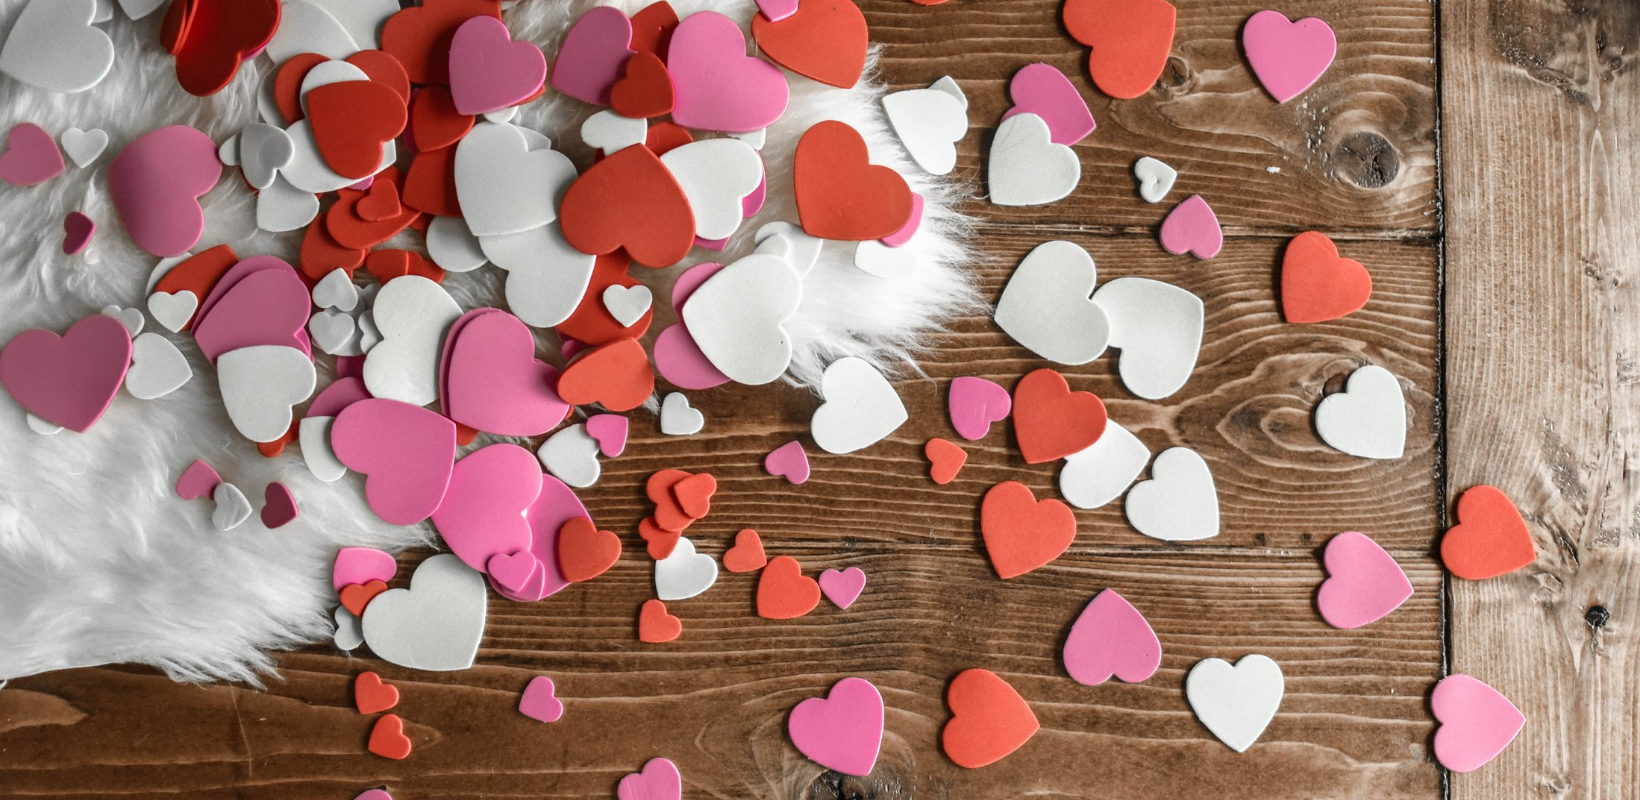 Valentine's Day Promotion Ideas for Your Shopify Online Business 202